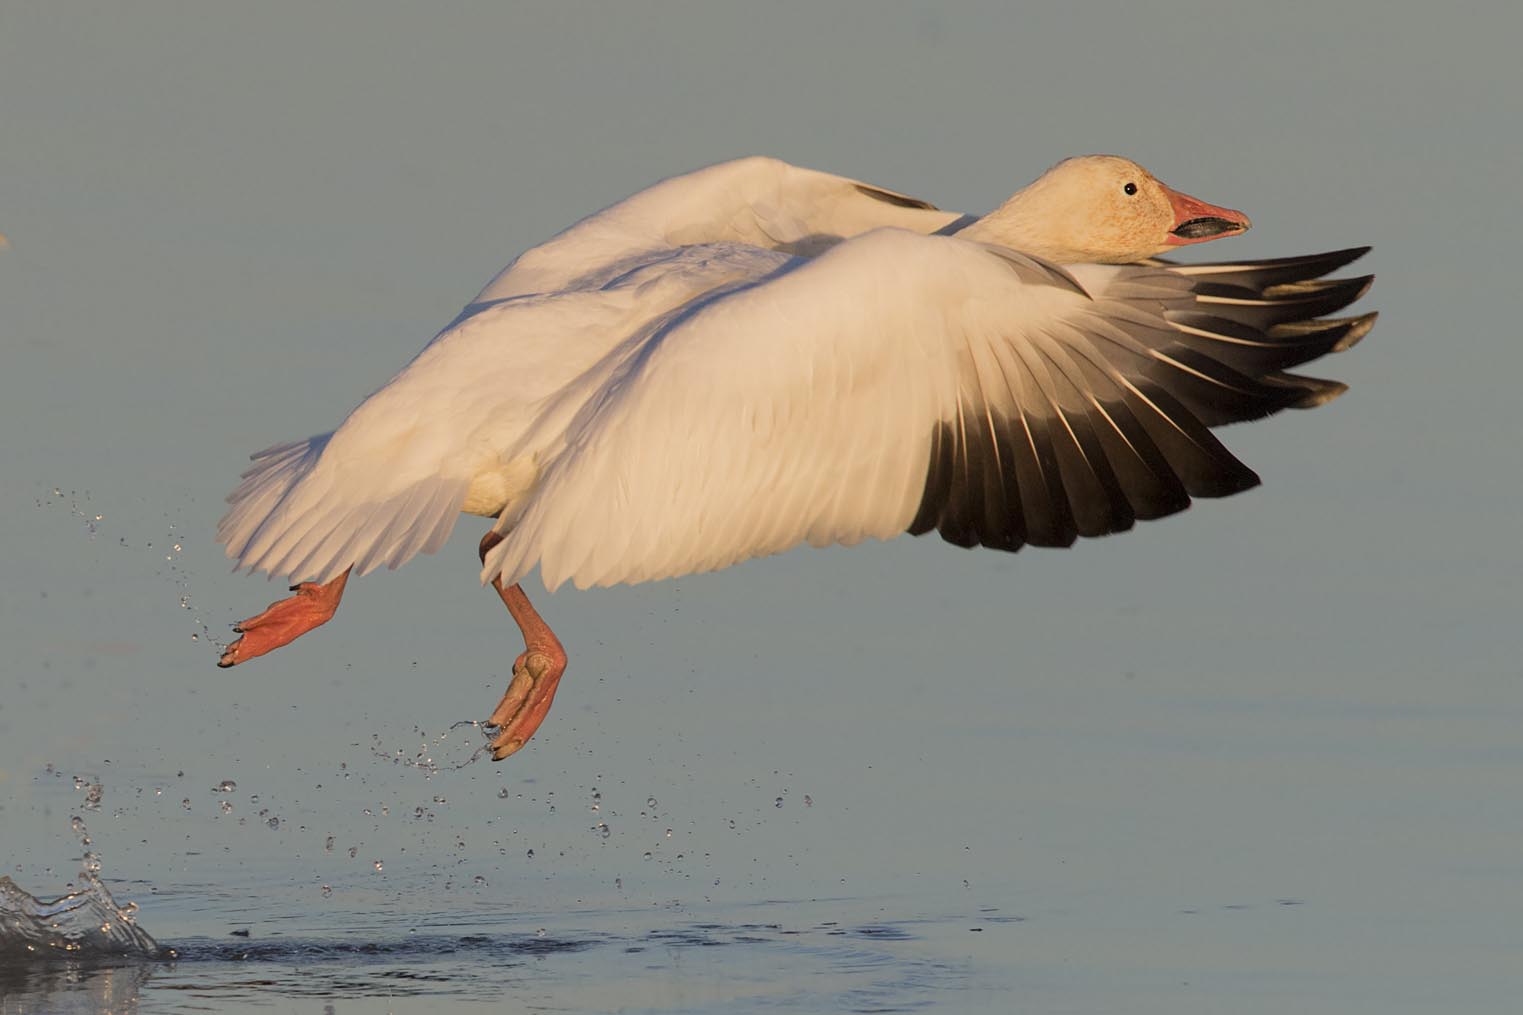 Snow Goose taking off 3726bs